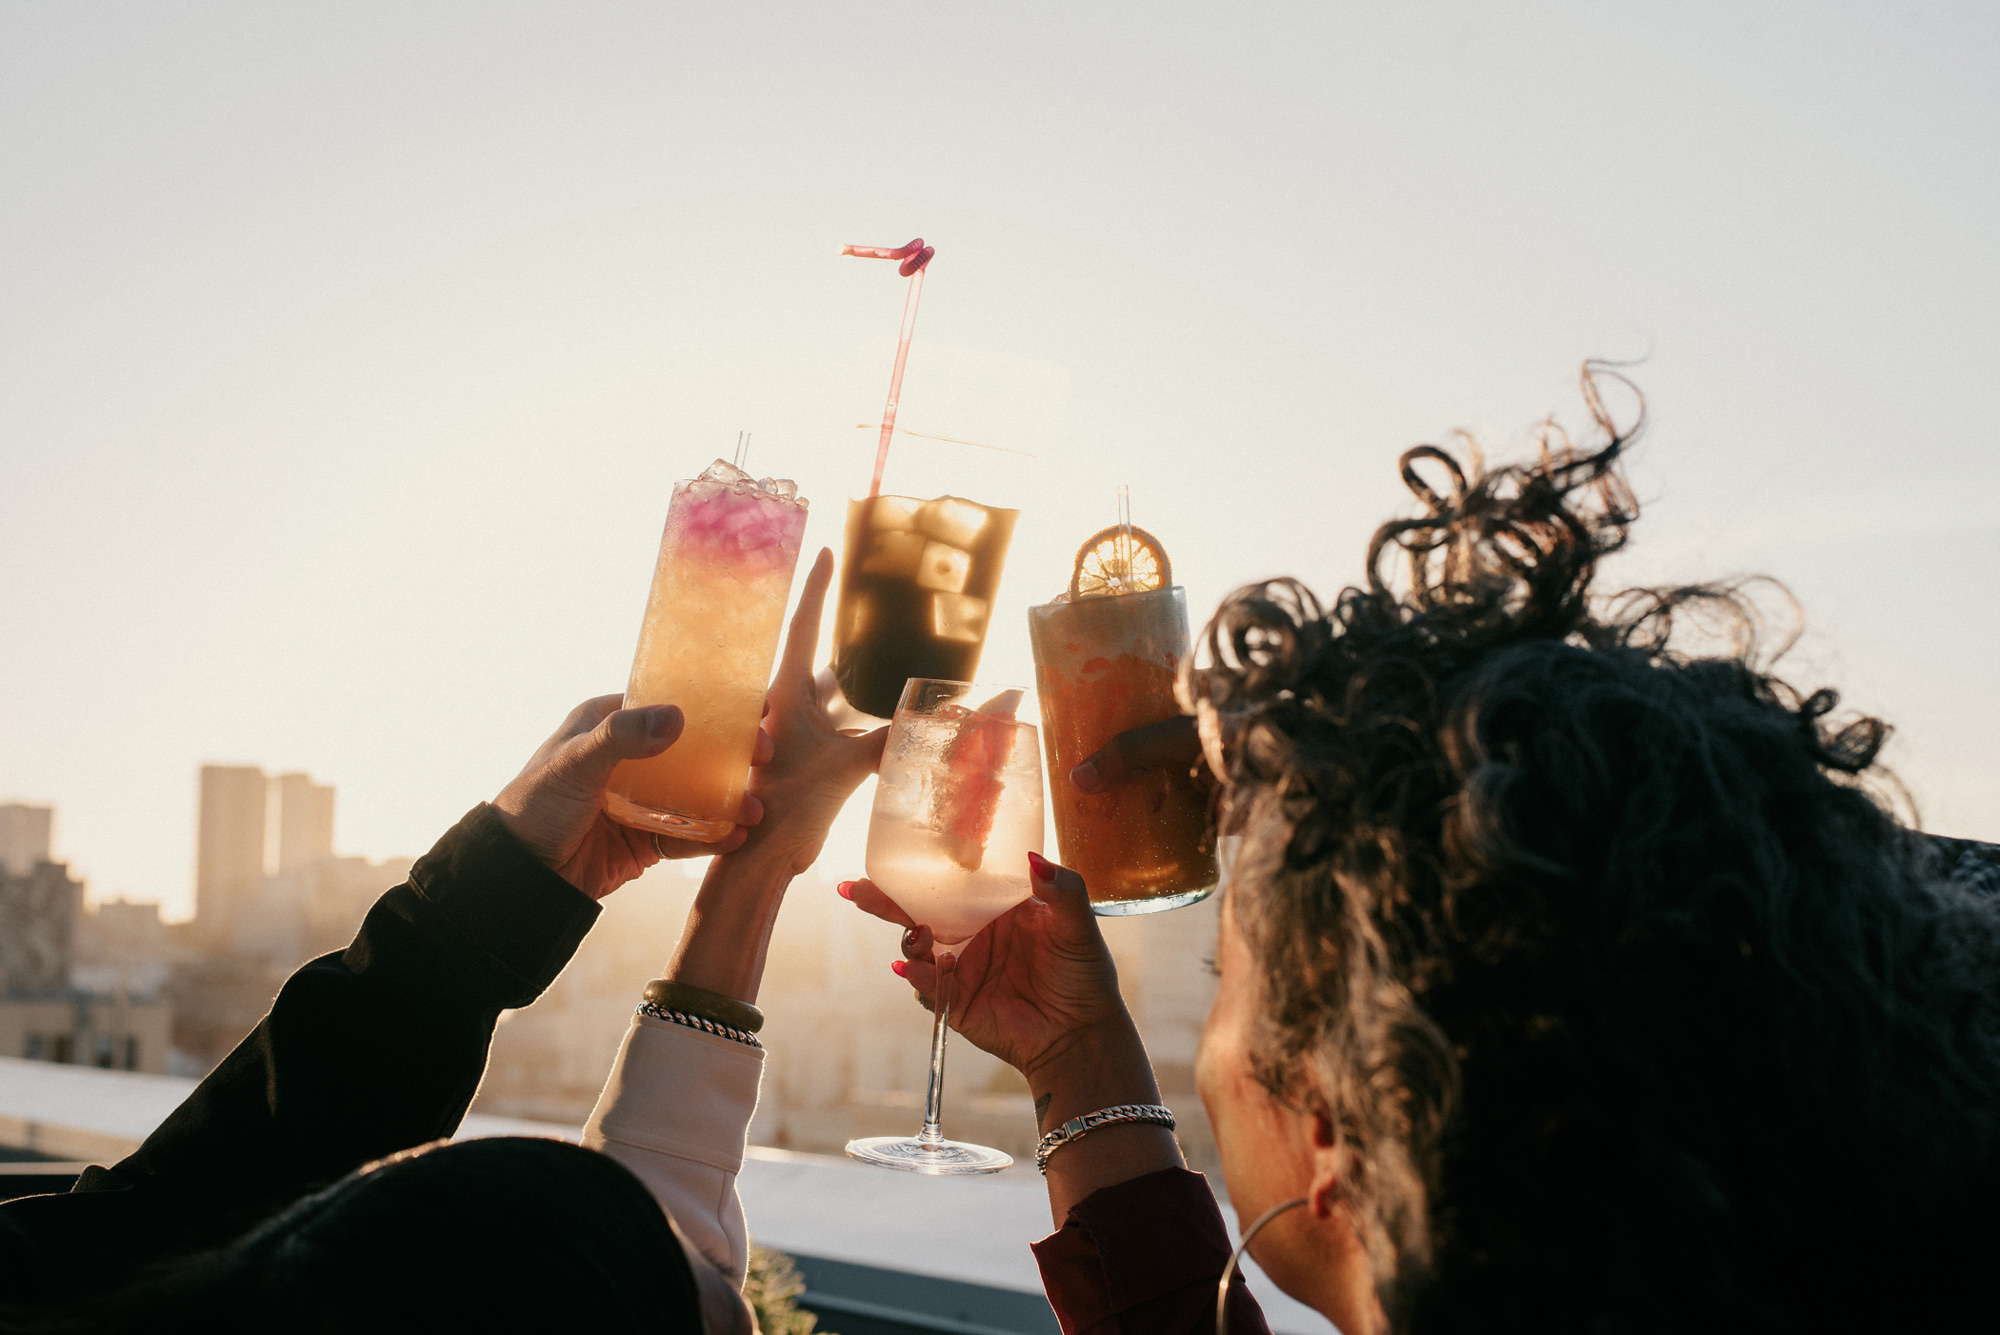 People's hands cheers with drinks above a city sunset skyline